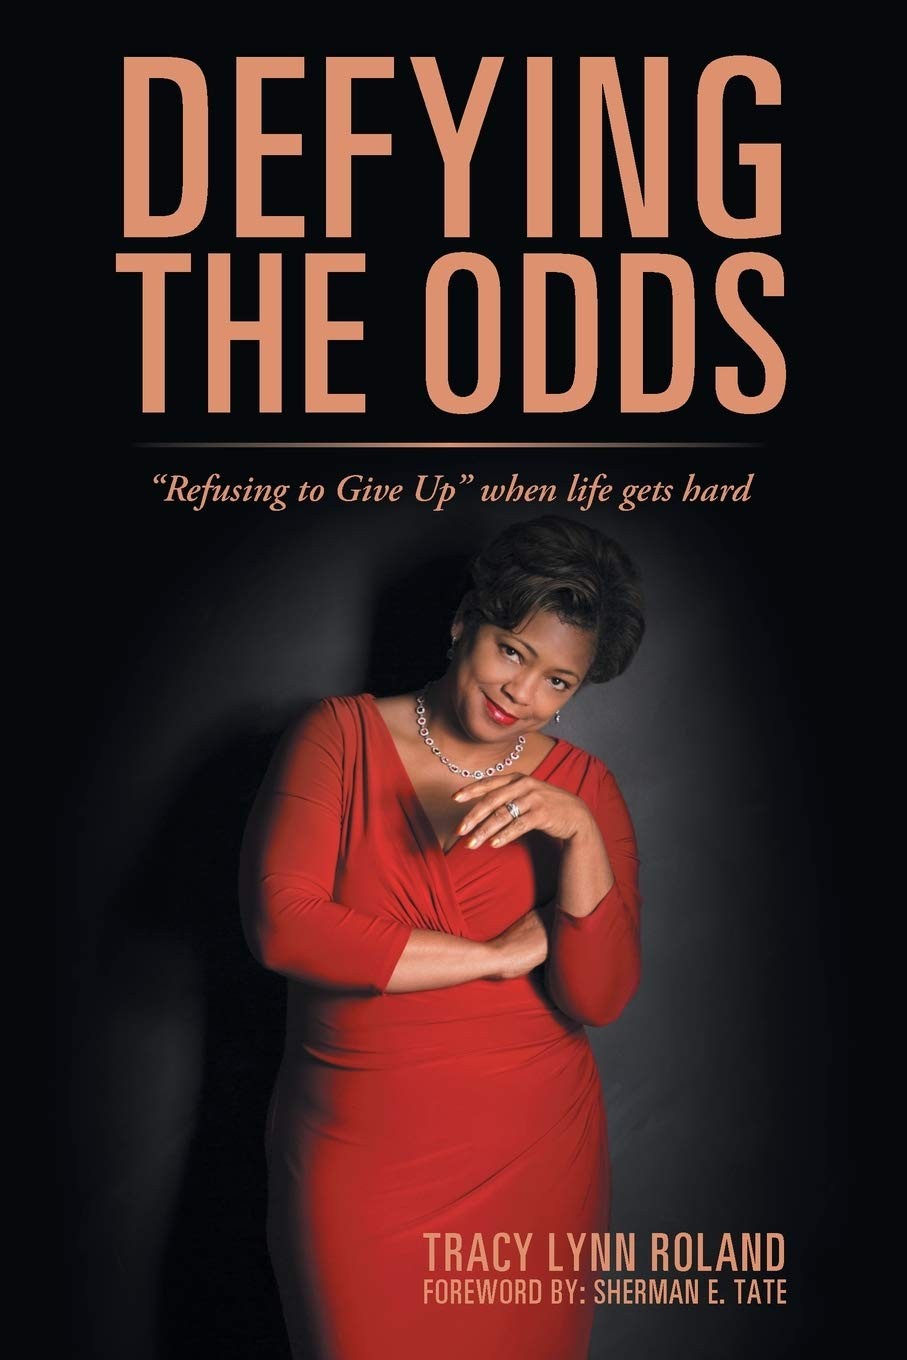 kiu-book-club-defying-the-odds-“refusing-to-give-up”-when-life-gets-hard-by-tracy-lynn-roland